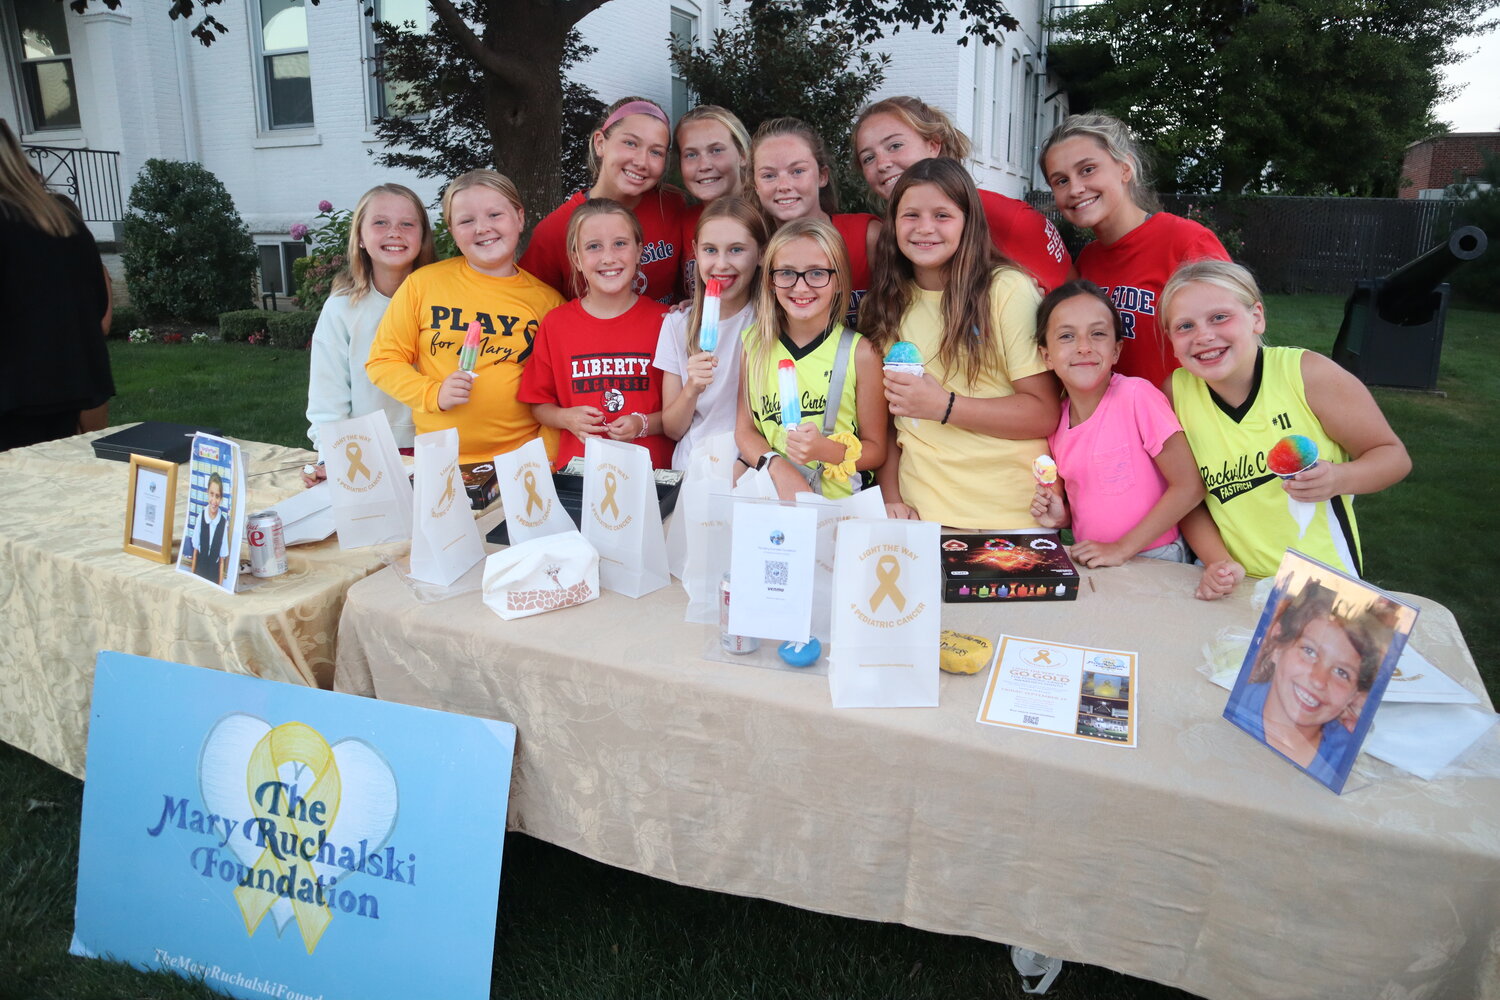 Kids help lend a hand to the Mary Ruchalski Foundation by selling gold bows and luminarias to ‘Light it Up Gold’ for pediatric cancer awareness month.